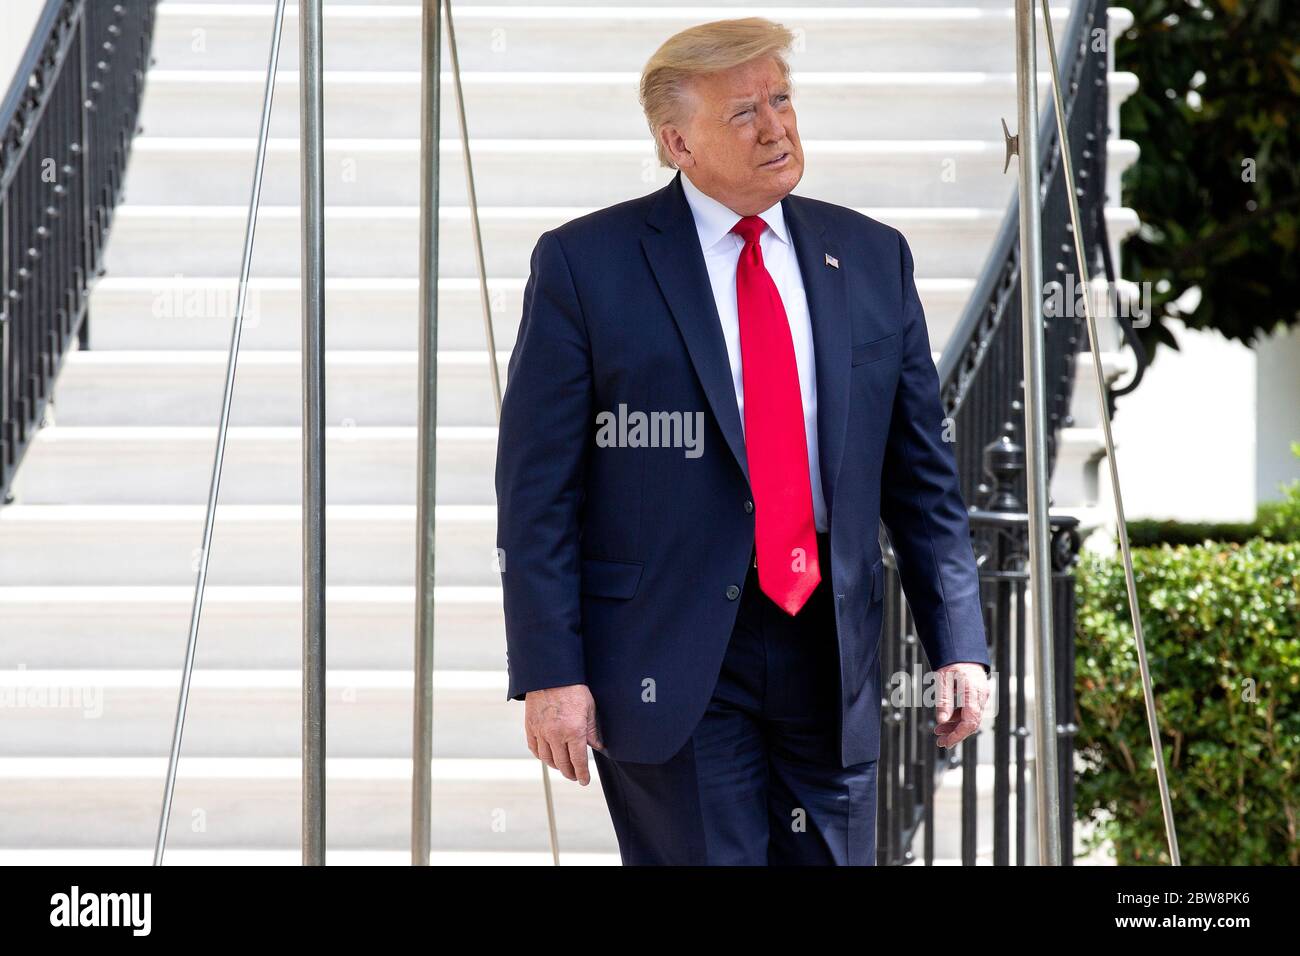 Washington, DC, USA. 30th May, 2020. United States President Donald J. Trump departs the White House in Washington, DC, U.S., on Saturday, May 30, 2020. Trump has used Twitter to criticize protests prompted by the death of George Floyd, as well as the response of Democratic leaders, after demonstrators clashed with Secret Service agents outside the White House last night. Credit: Stefani Reynolds/Pool via CNP | usage worldwide Credit: dpa/Alamy Live News Stock Photo